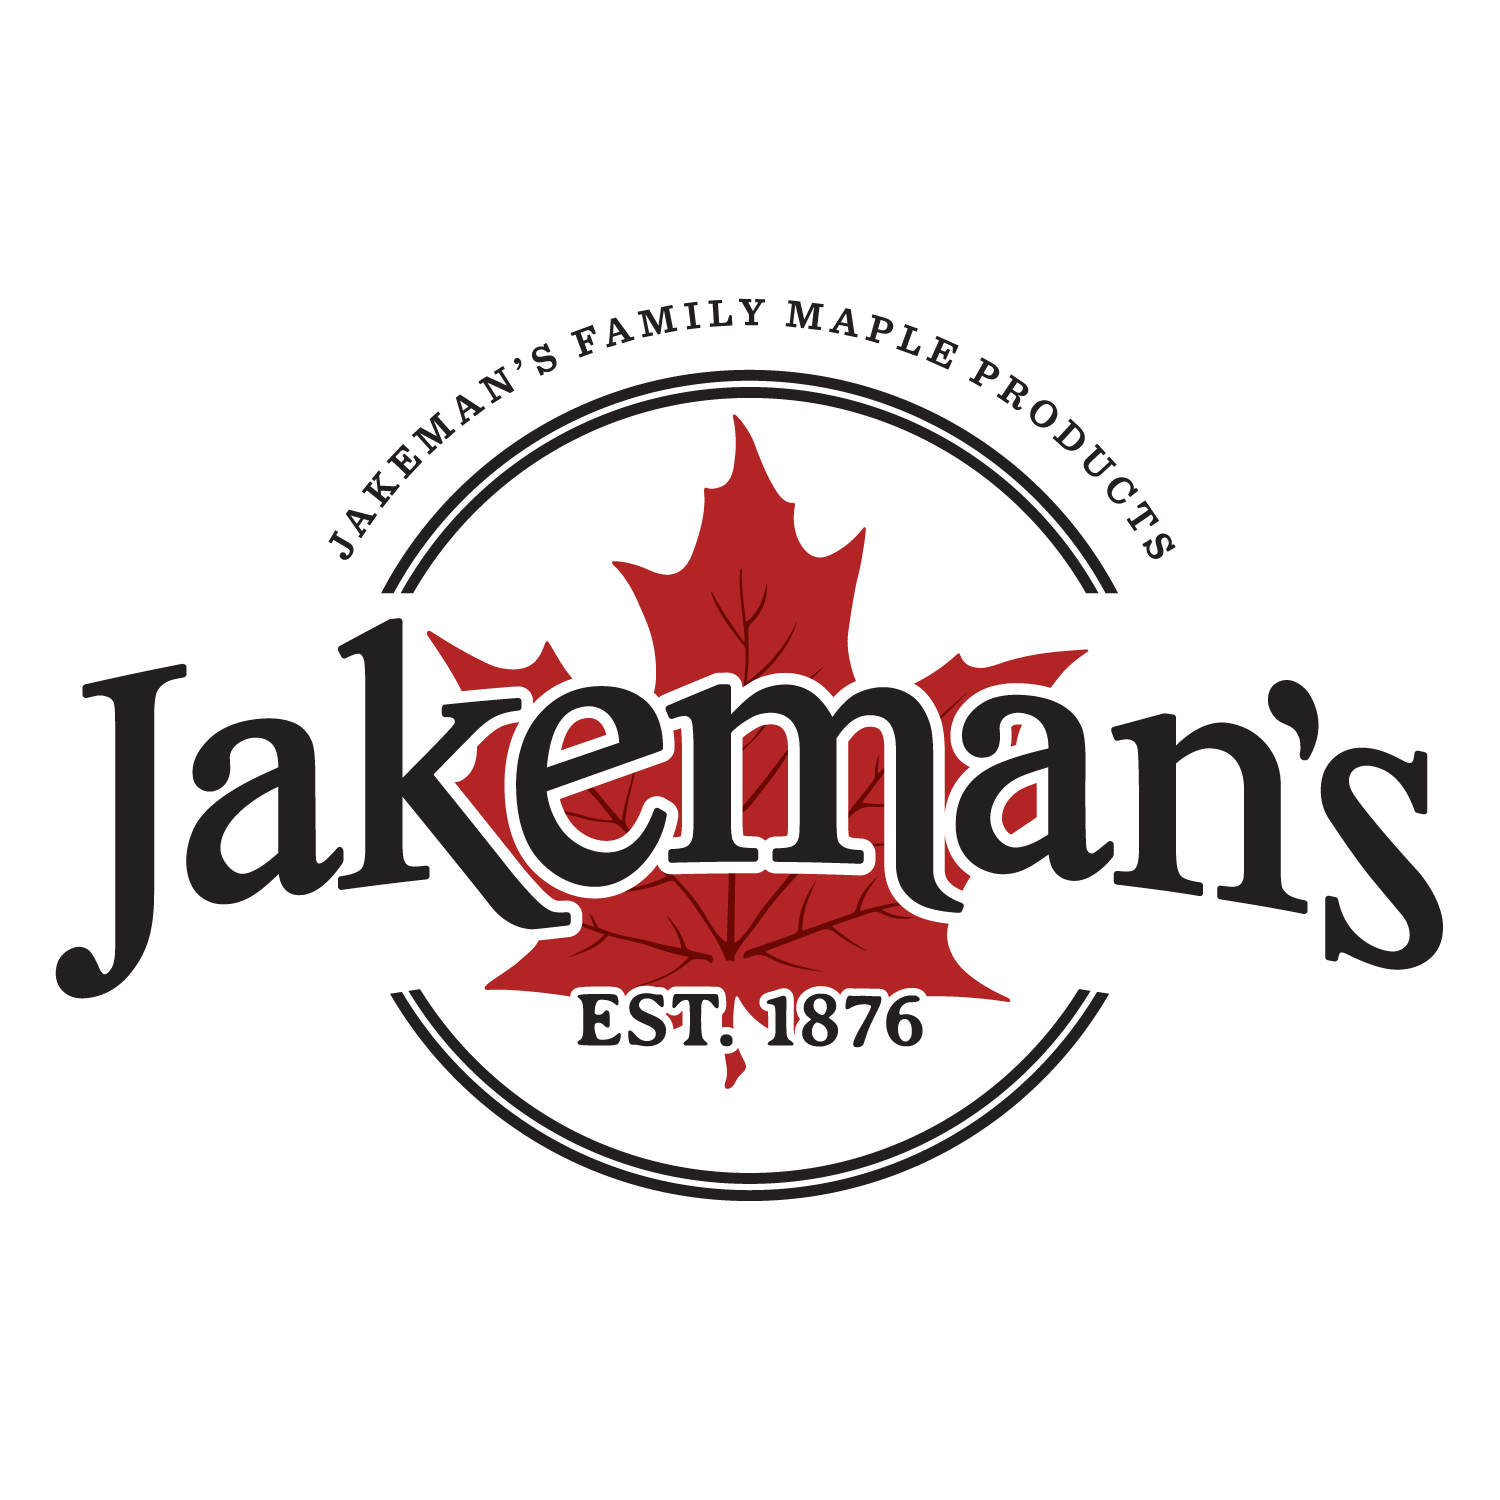 Jakeman's Family Maple Products